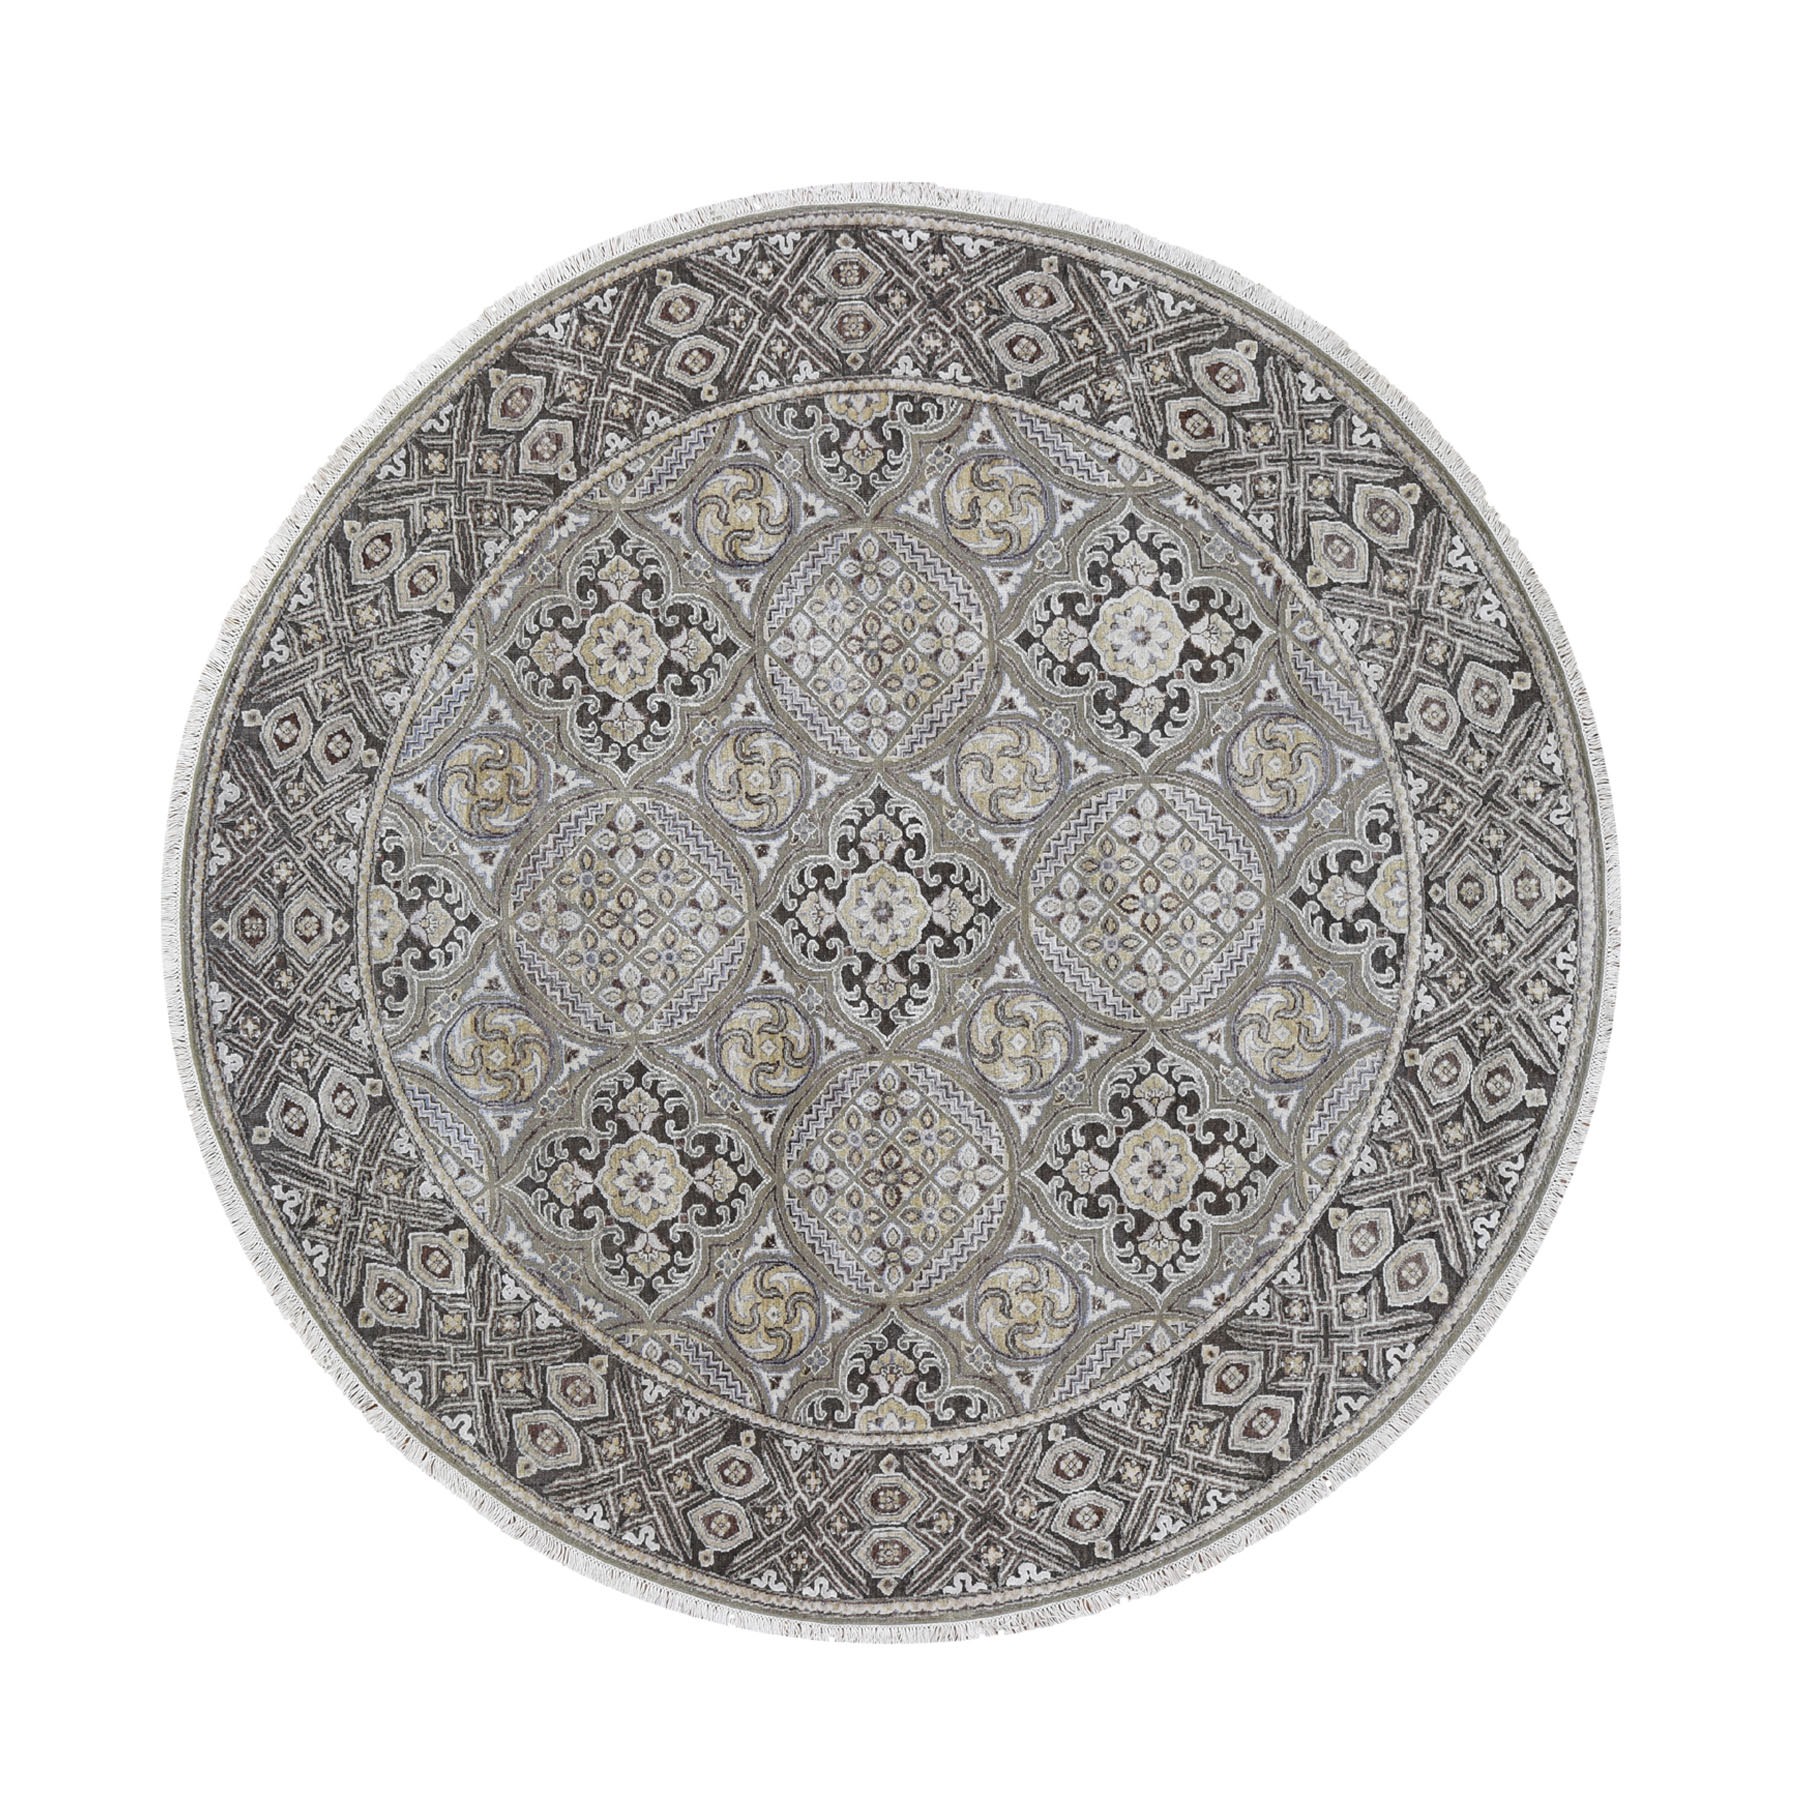 10-x10- Textured Wool and Silk Mughal Inspired Medallions Round Hand-Knotted Oriental Rug 